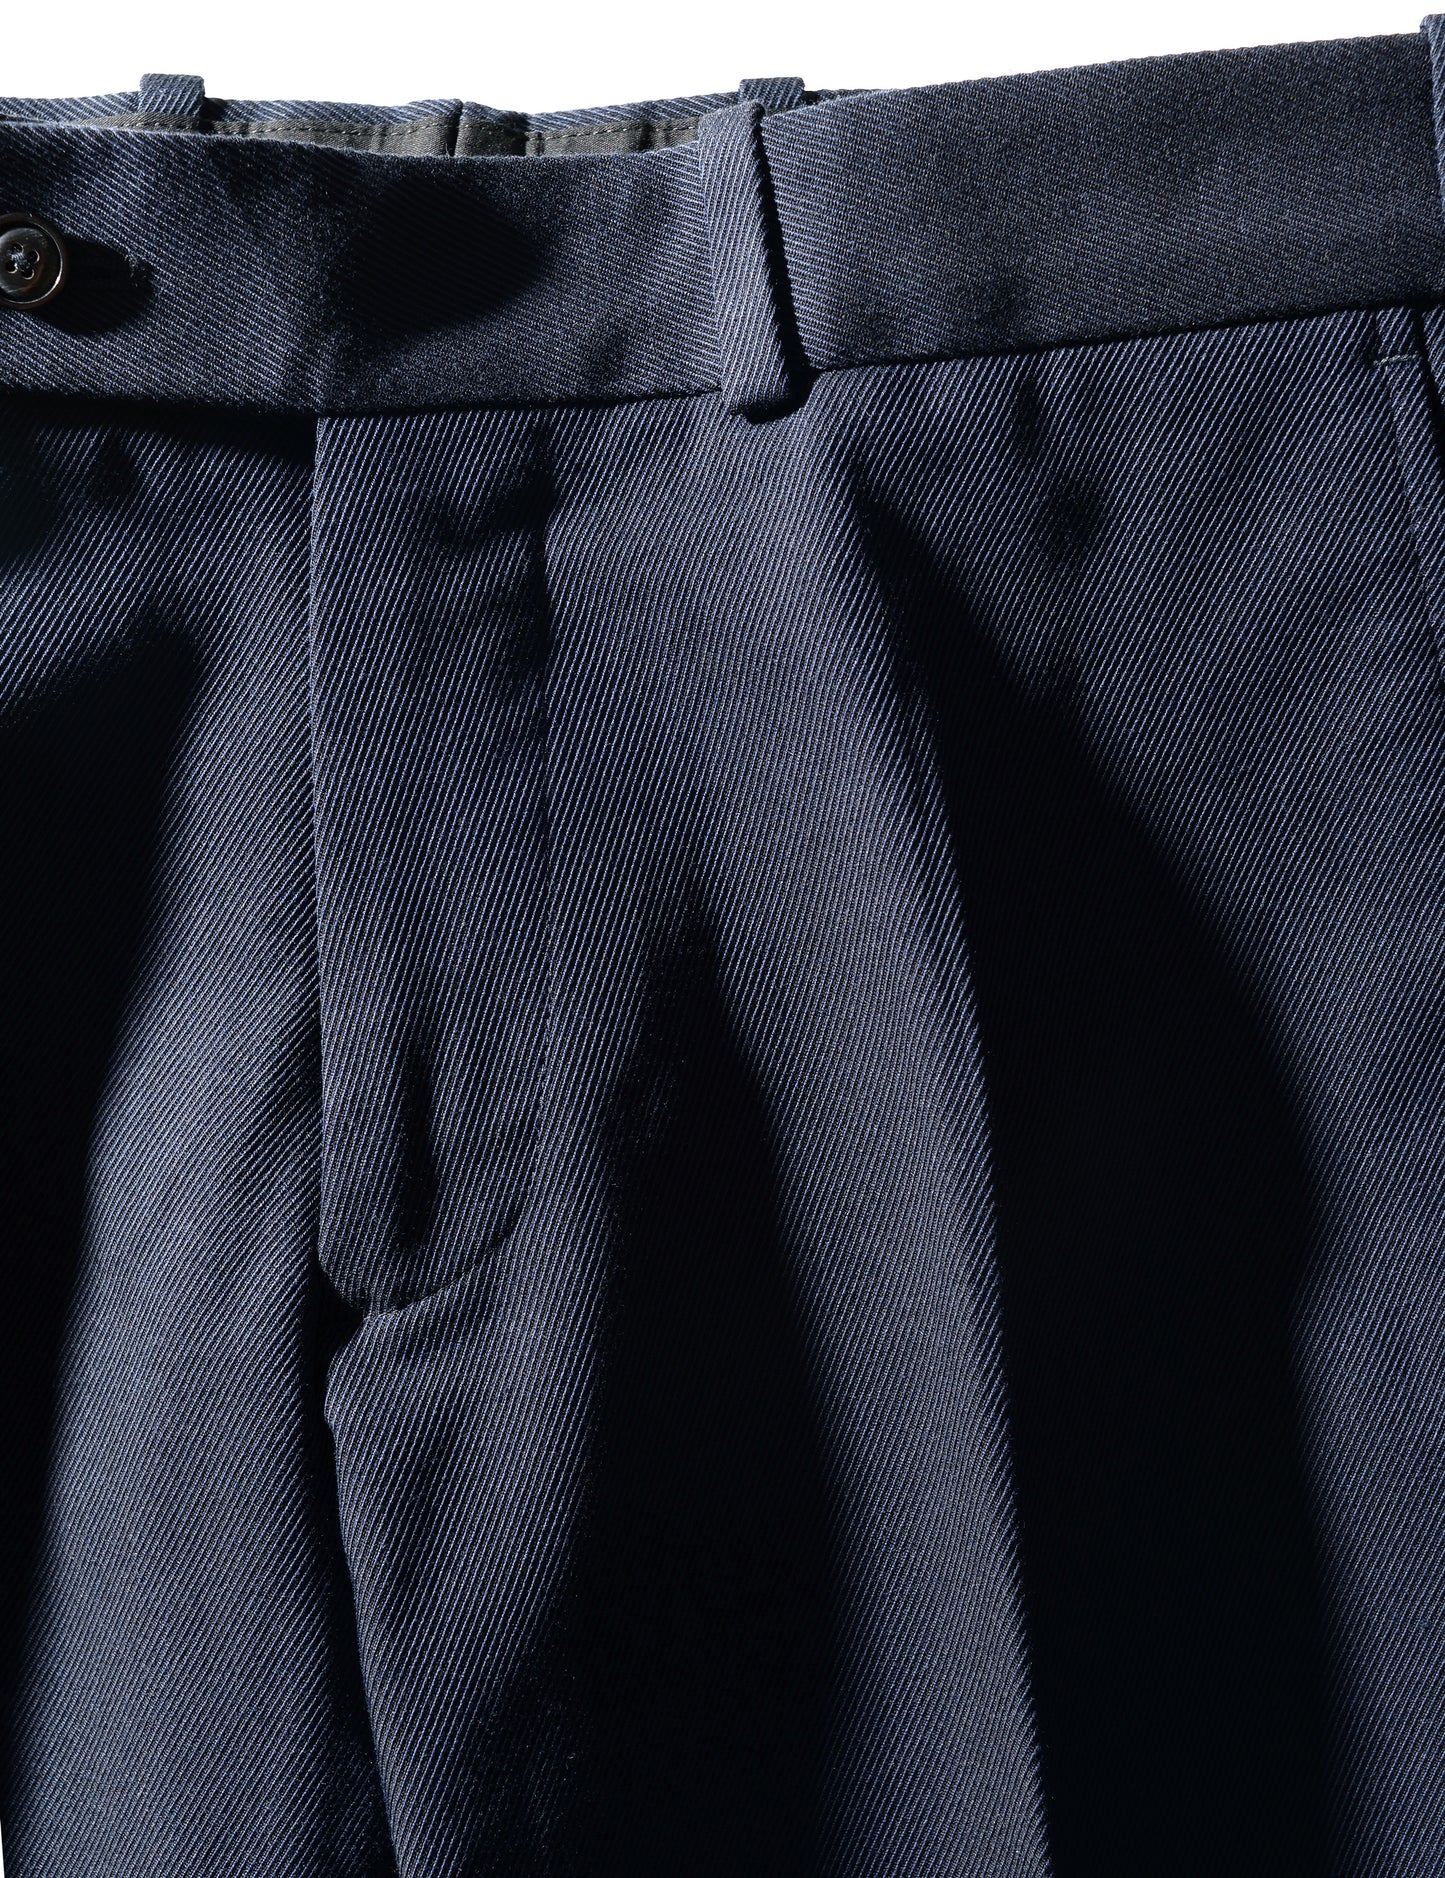 BKT50 Tailored Trousers in Cavalry Twill - Navy